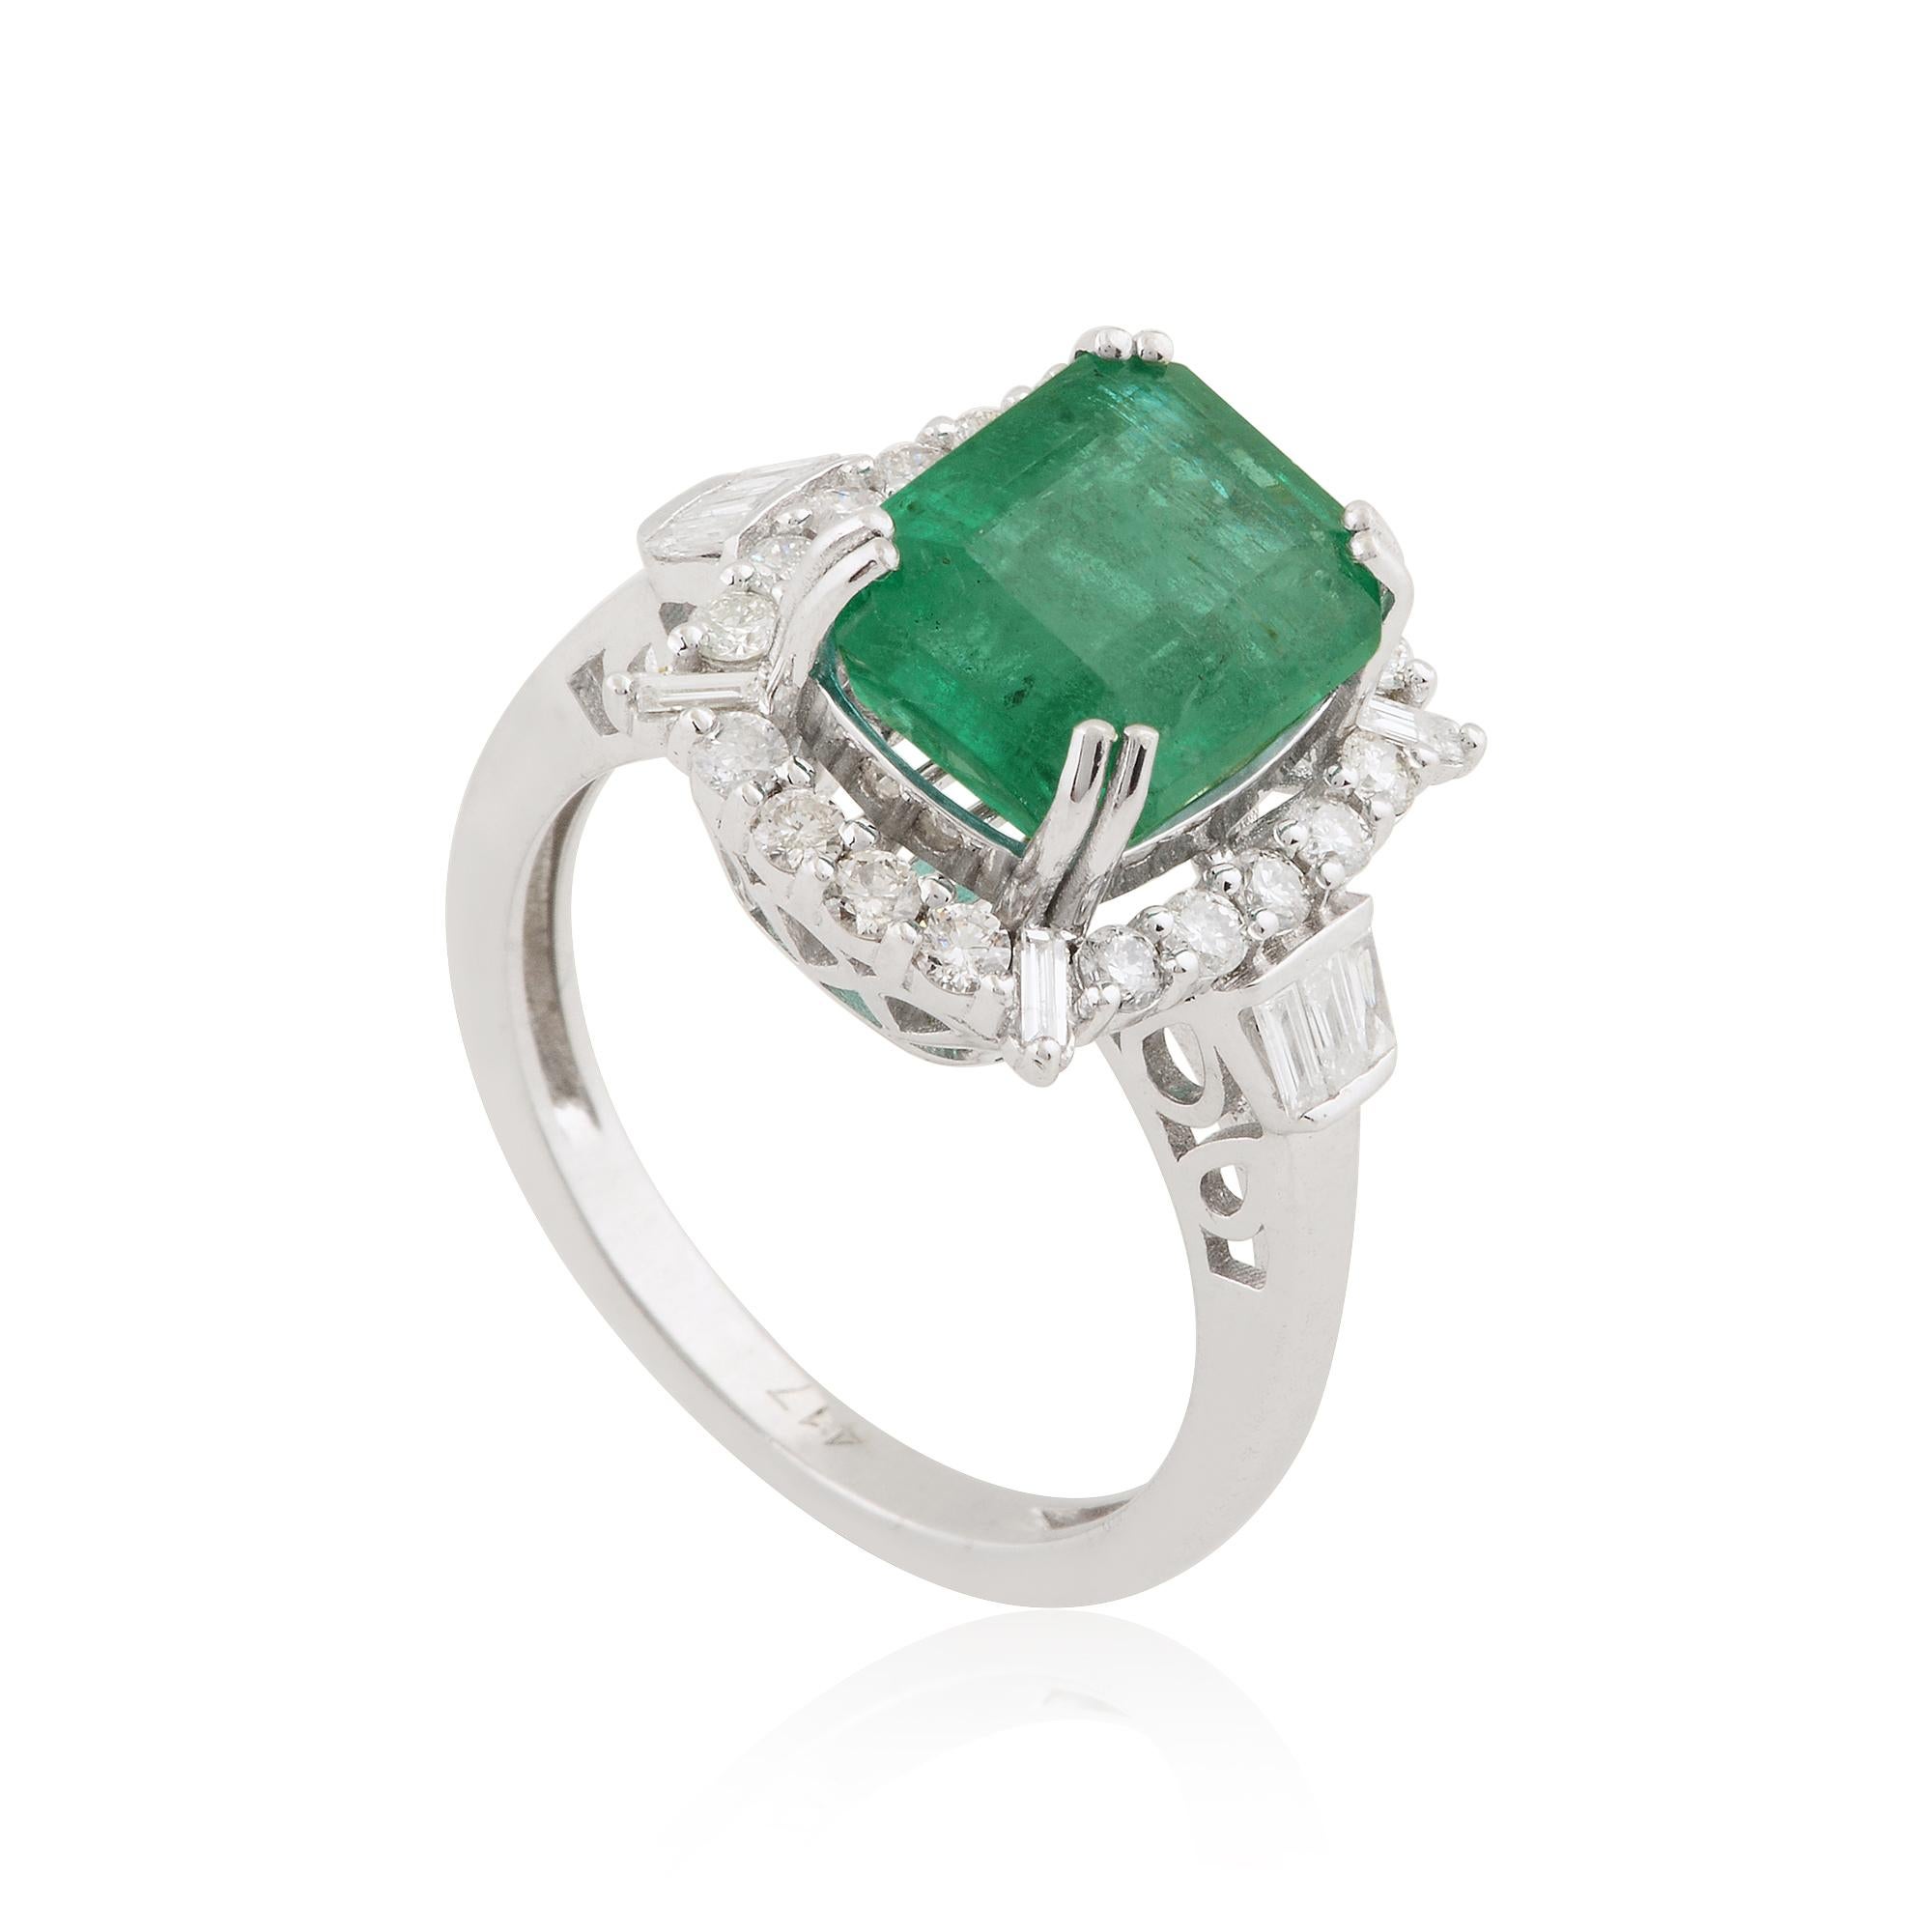 Introducing the epitome of elegance and luxury: the Zambian Emerald Gemstone Cocktail Fine Ring adorned with Baguette Diamonds, meticulously crafted in exquisite 10 Karat White Gold. This captivating ring is a true masterpiece of fine jewelry,